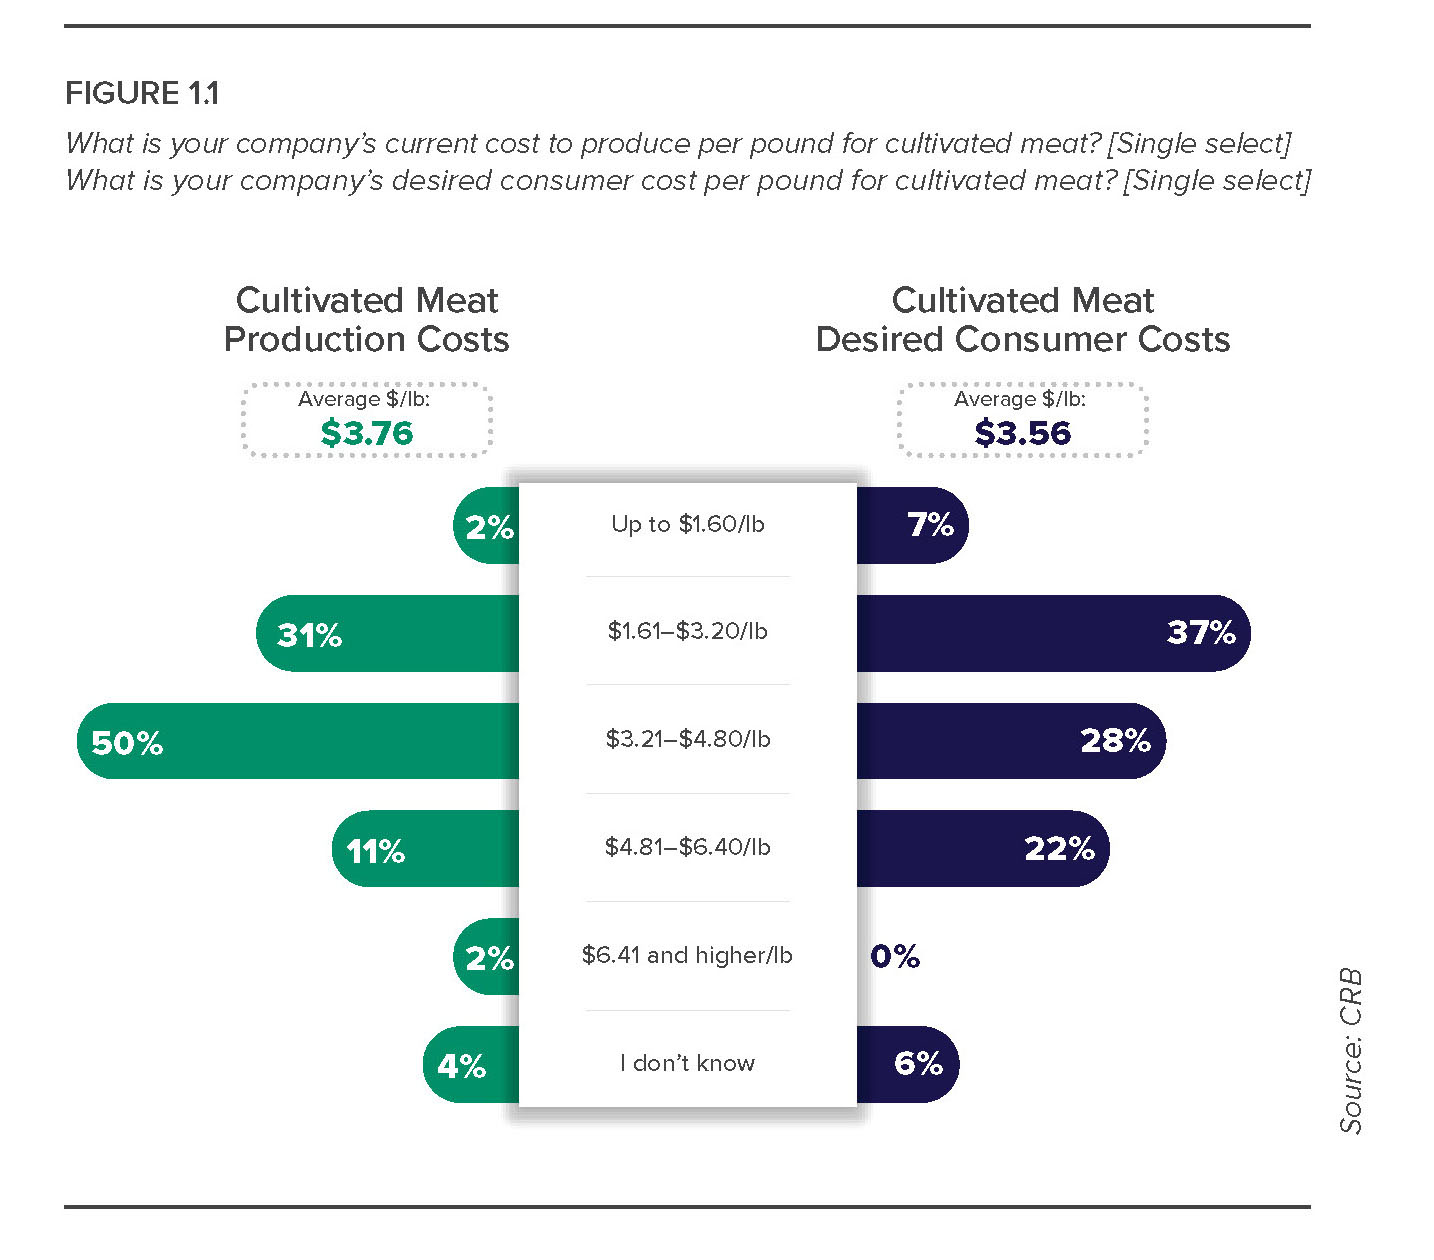 The current costs to produce cultuivated meats versus the consumers desired cost to purchase such a product from CRB